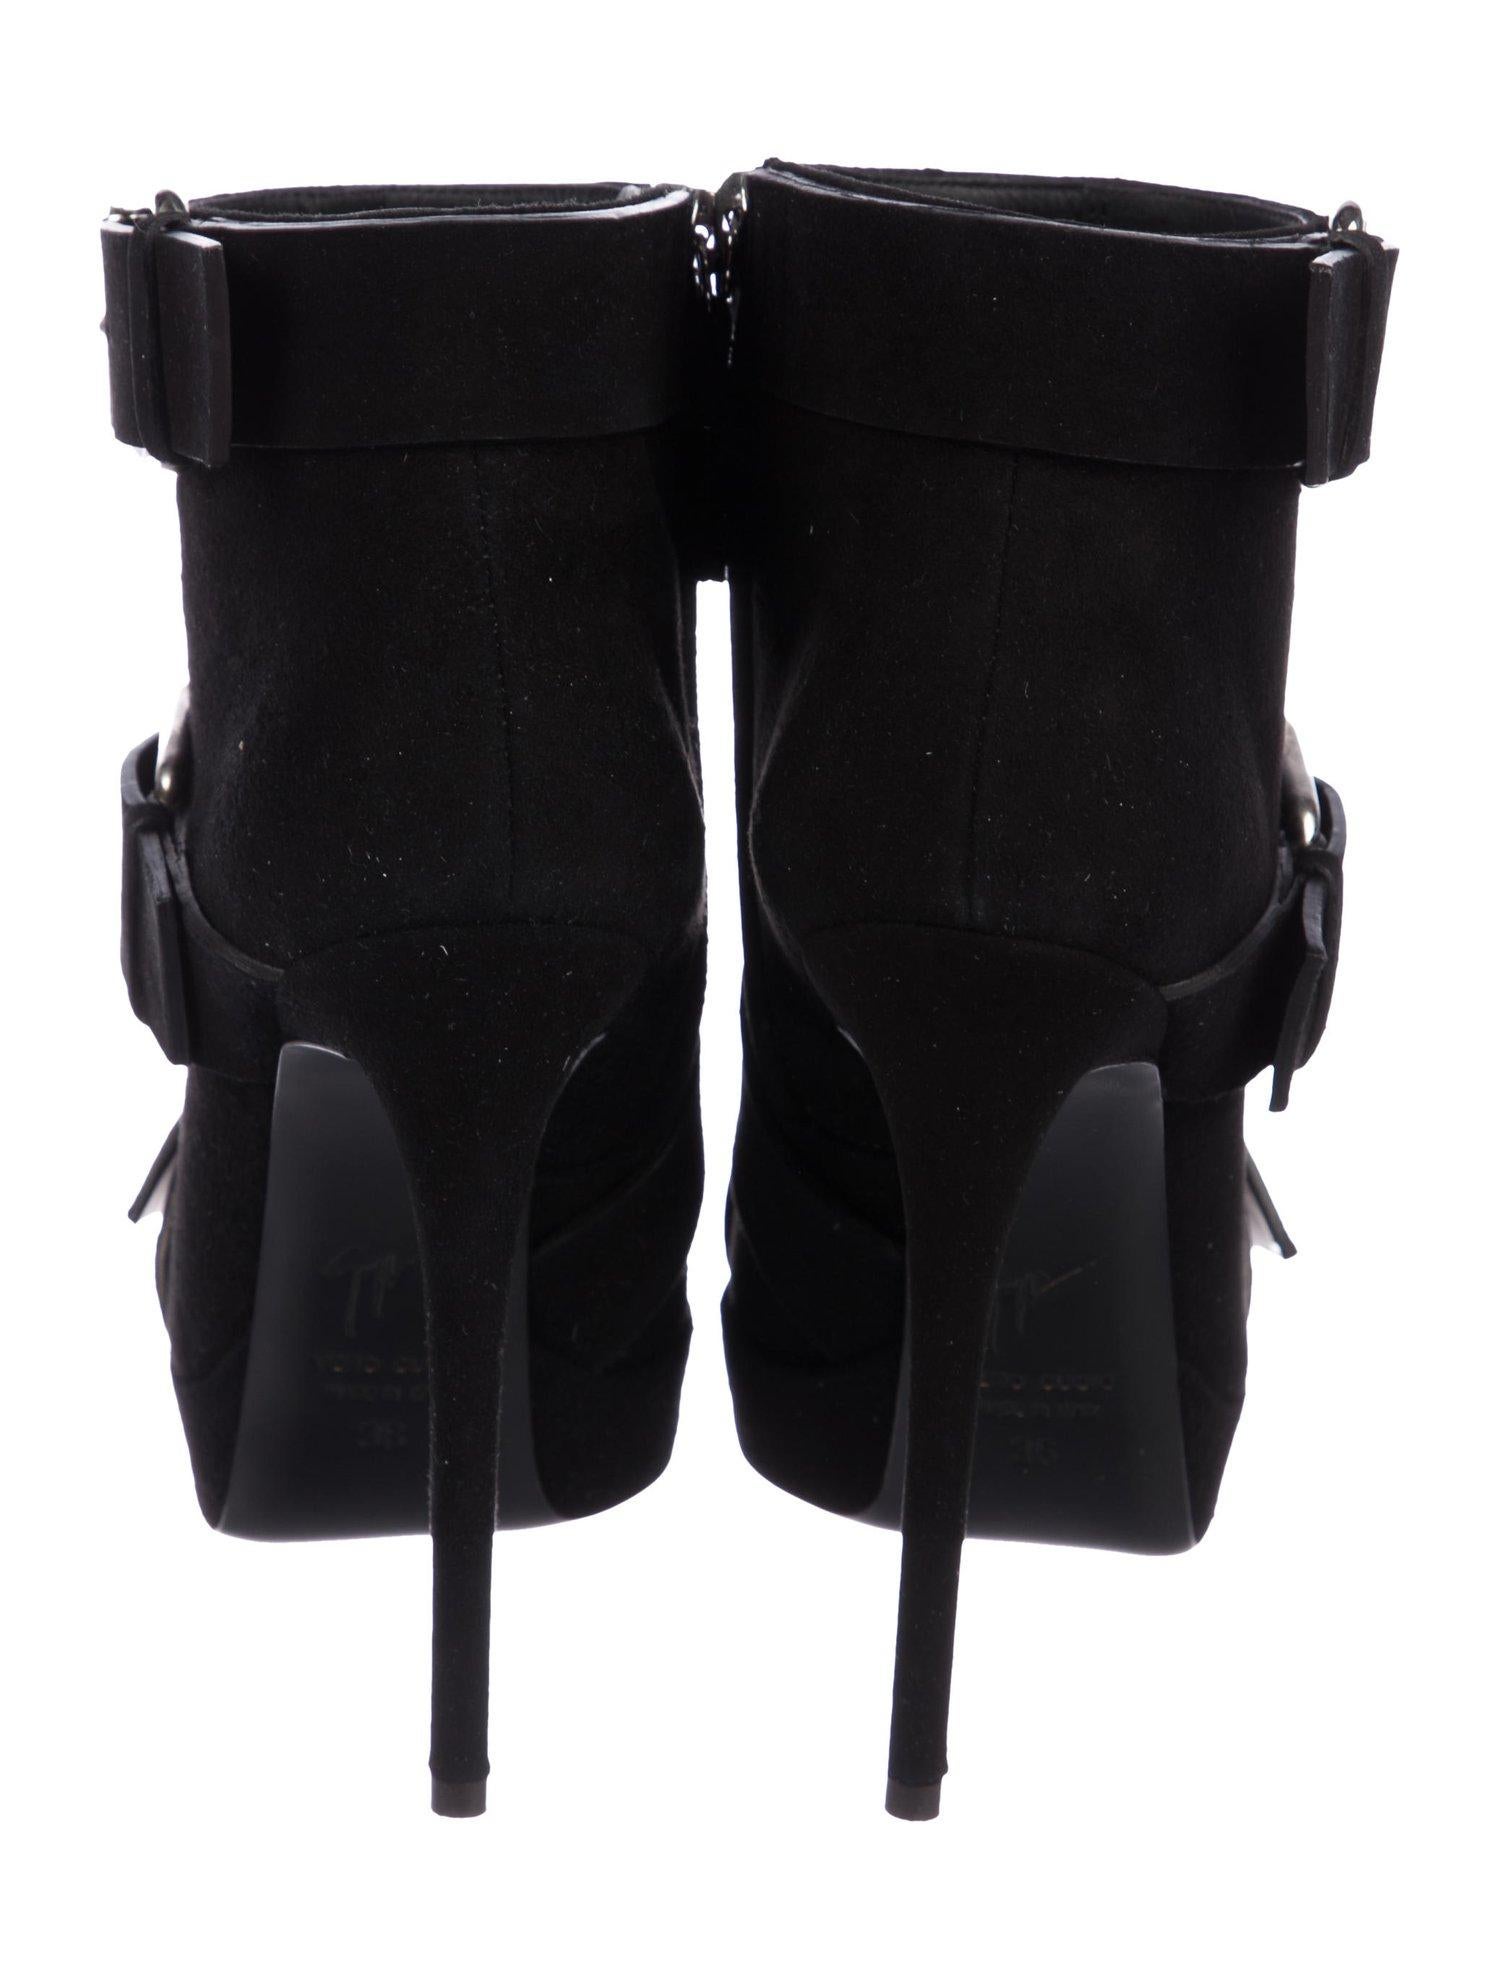 Giuseppe Zanotti NEW Black Suede Silver Biker Buckle Ankle Boots Booties in Box 1